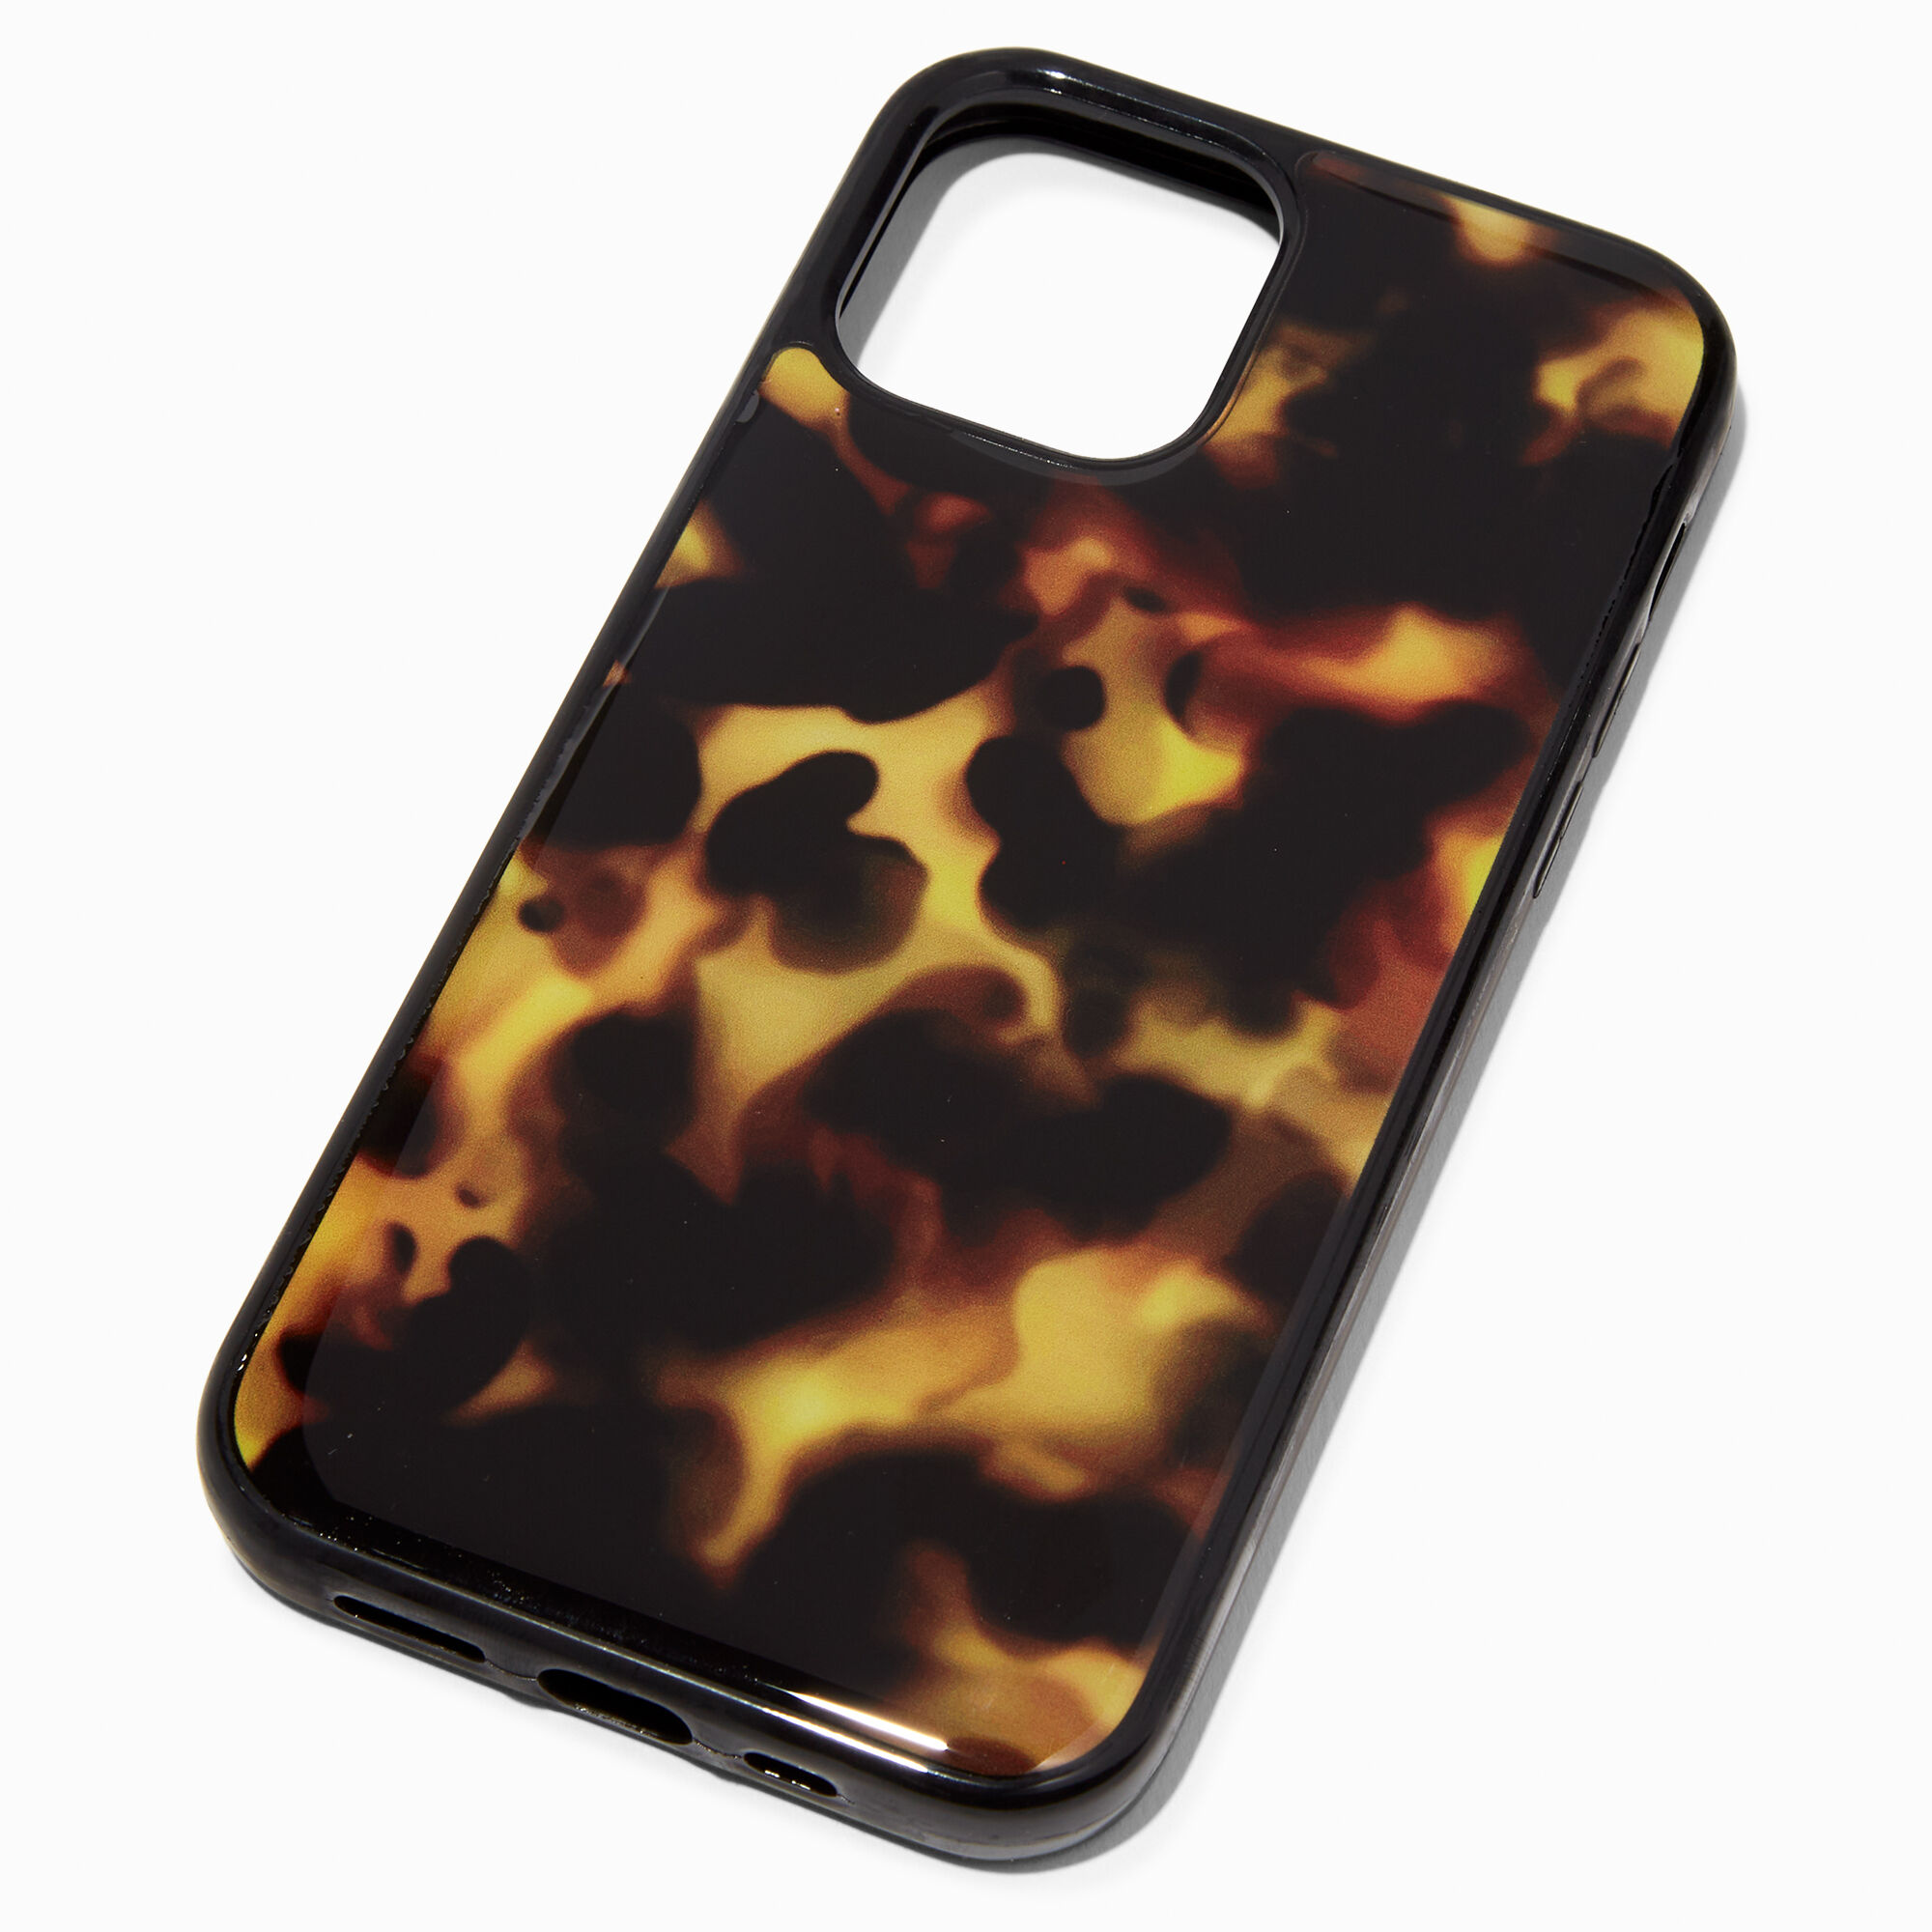 View Claires Tortoiseshell Protective Phone Case Fits Iphone 12 Pro information